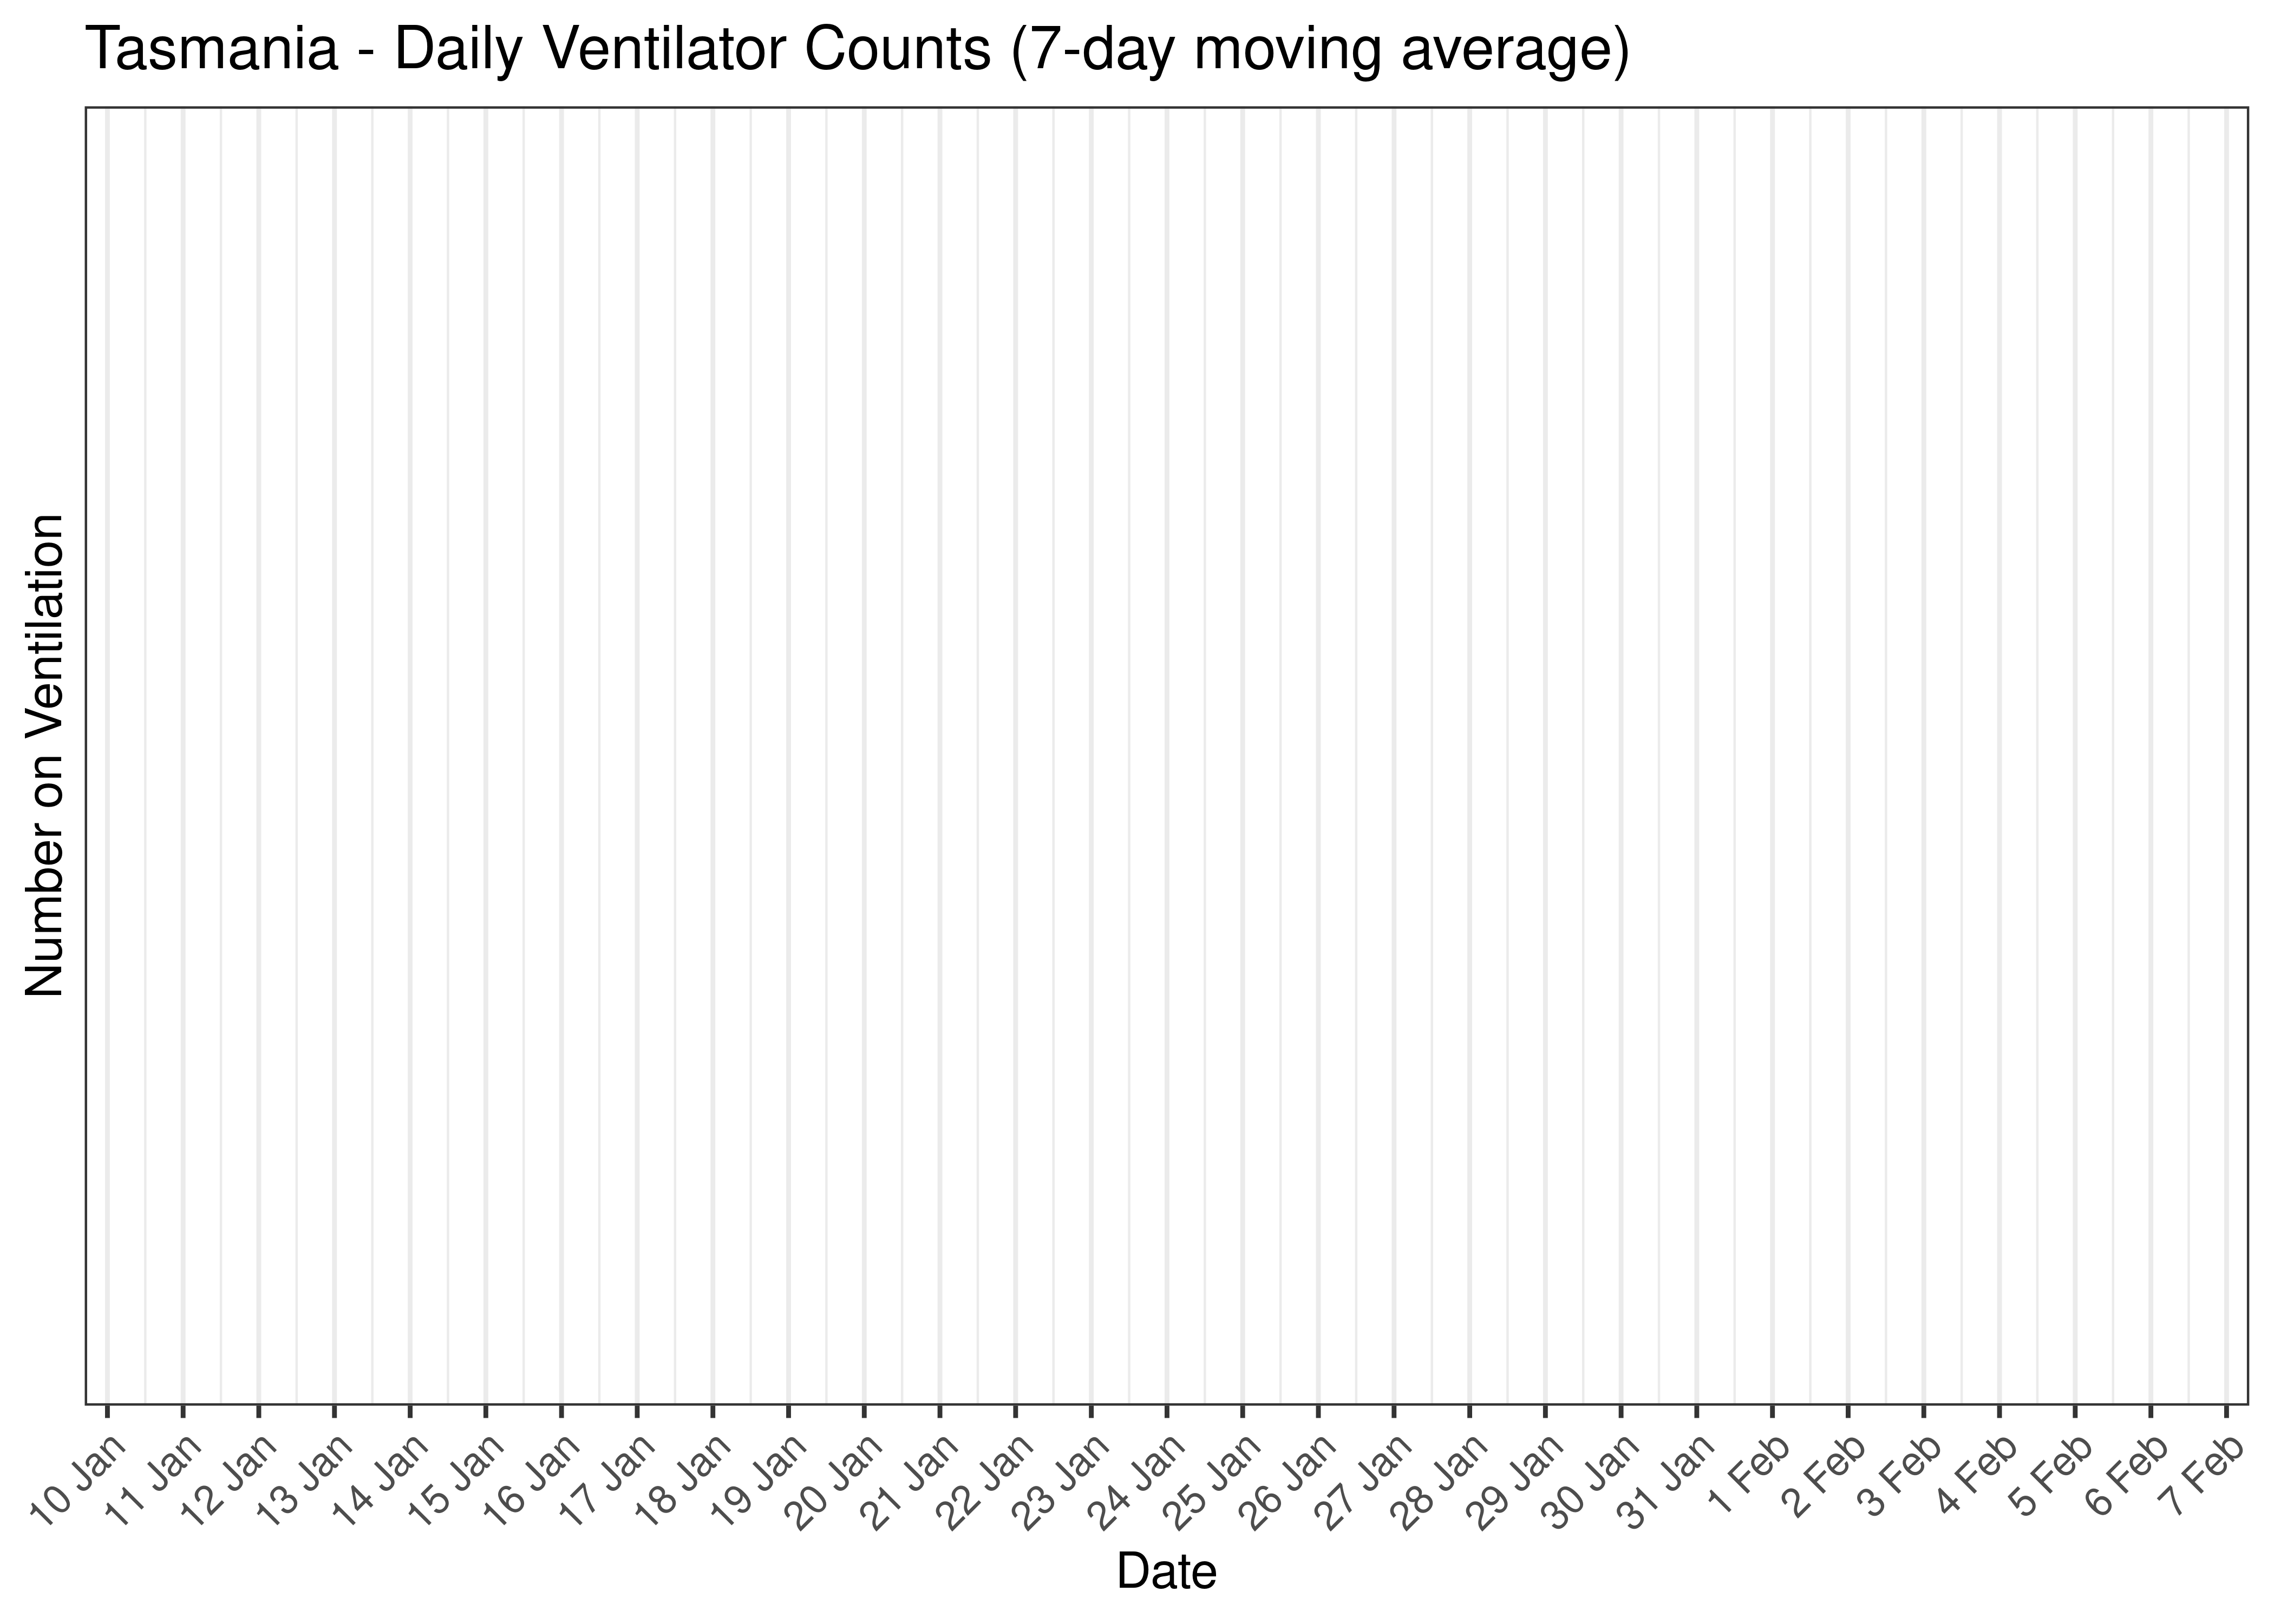 Tasmania - Daily Ventilator Counts for Last 30-days (7-day moving average)